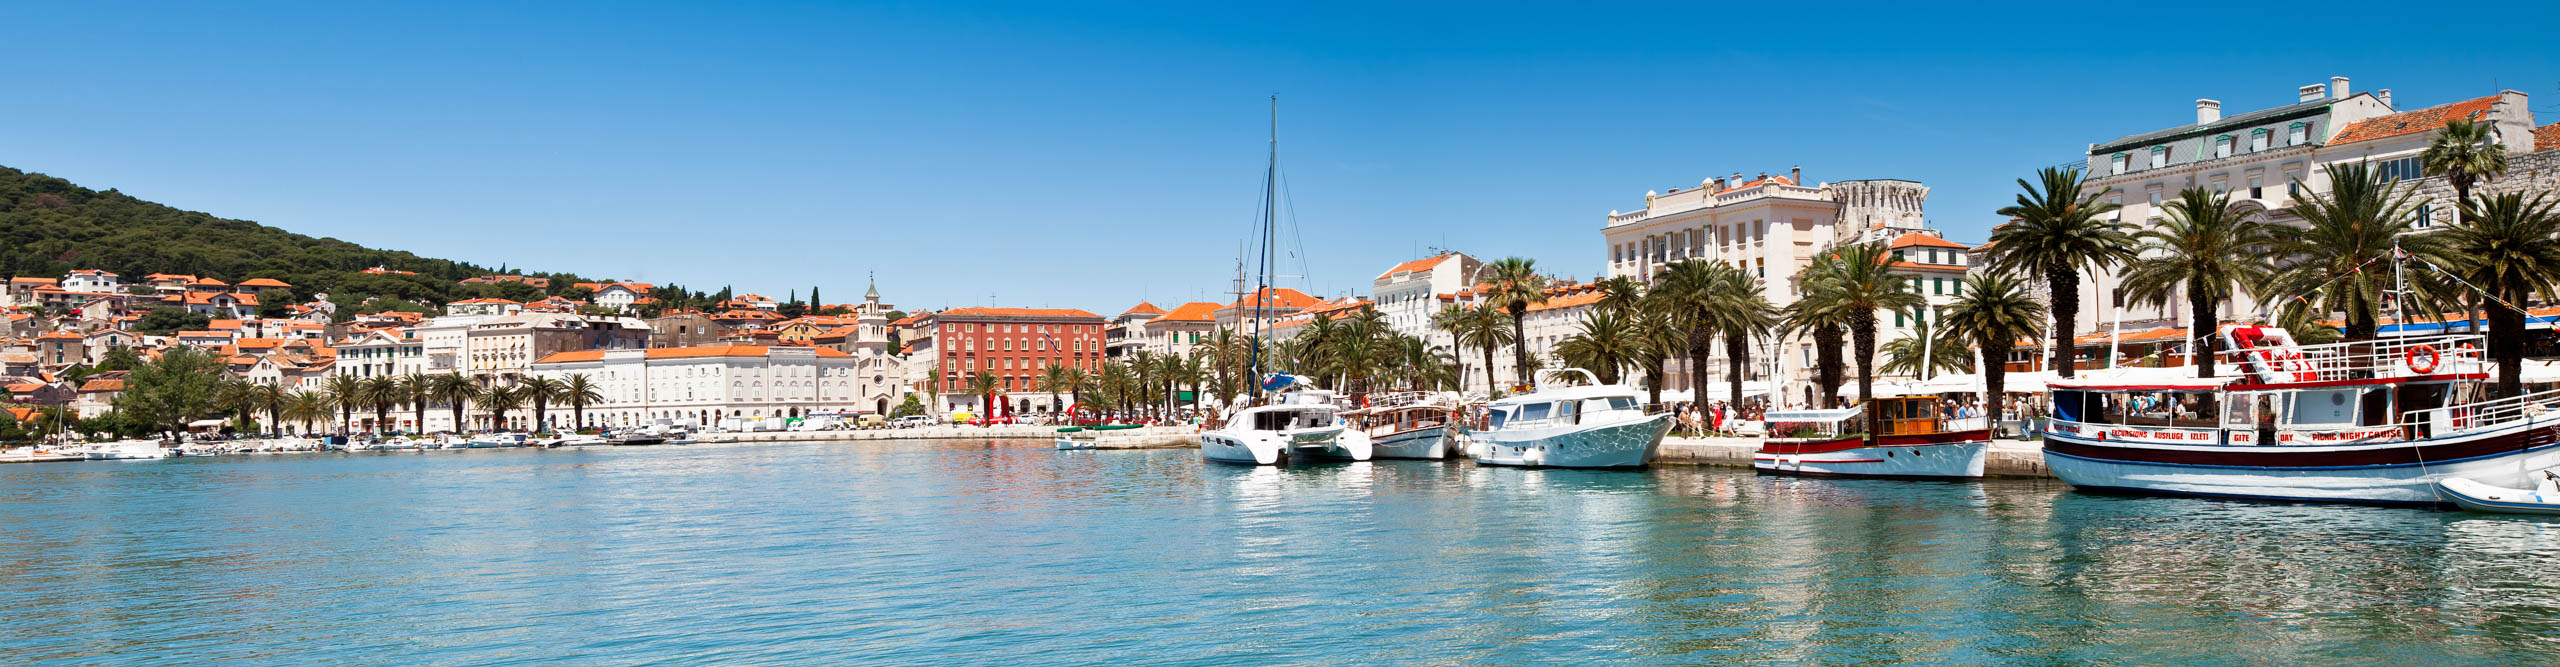 View of Spit harbour with palm trees on the promenade and a clear blue sky on a sunny day, Croatia